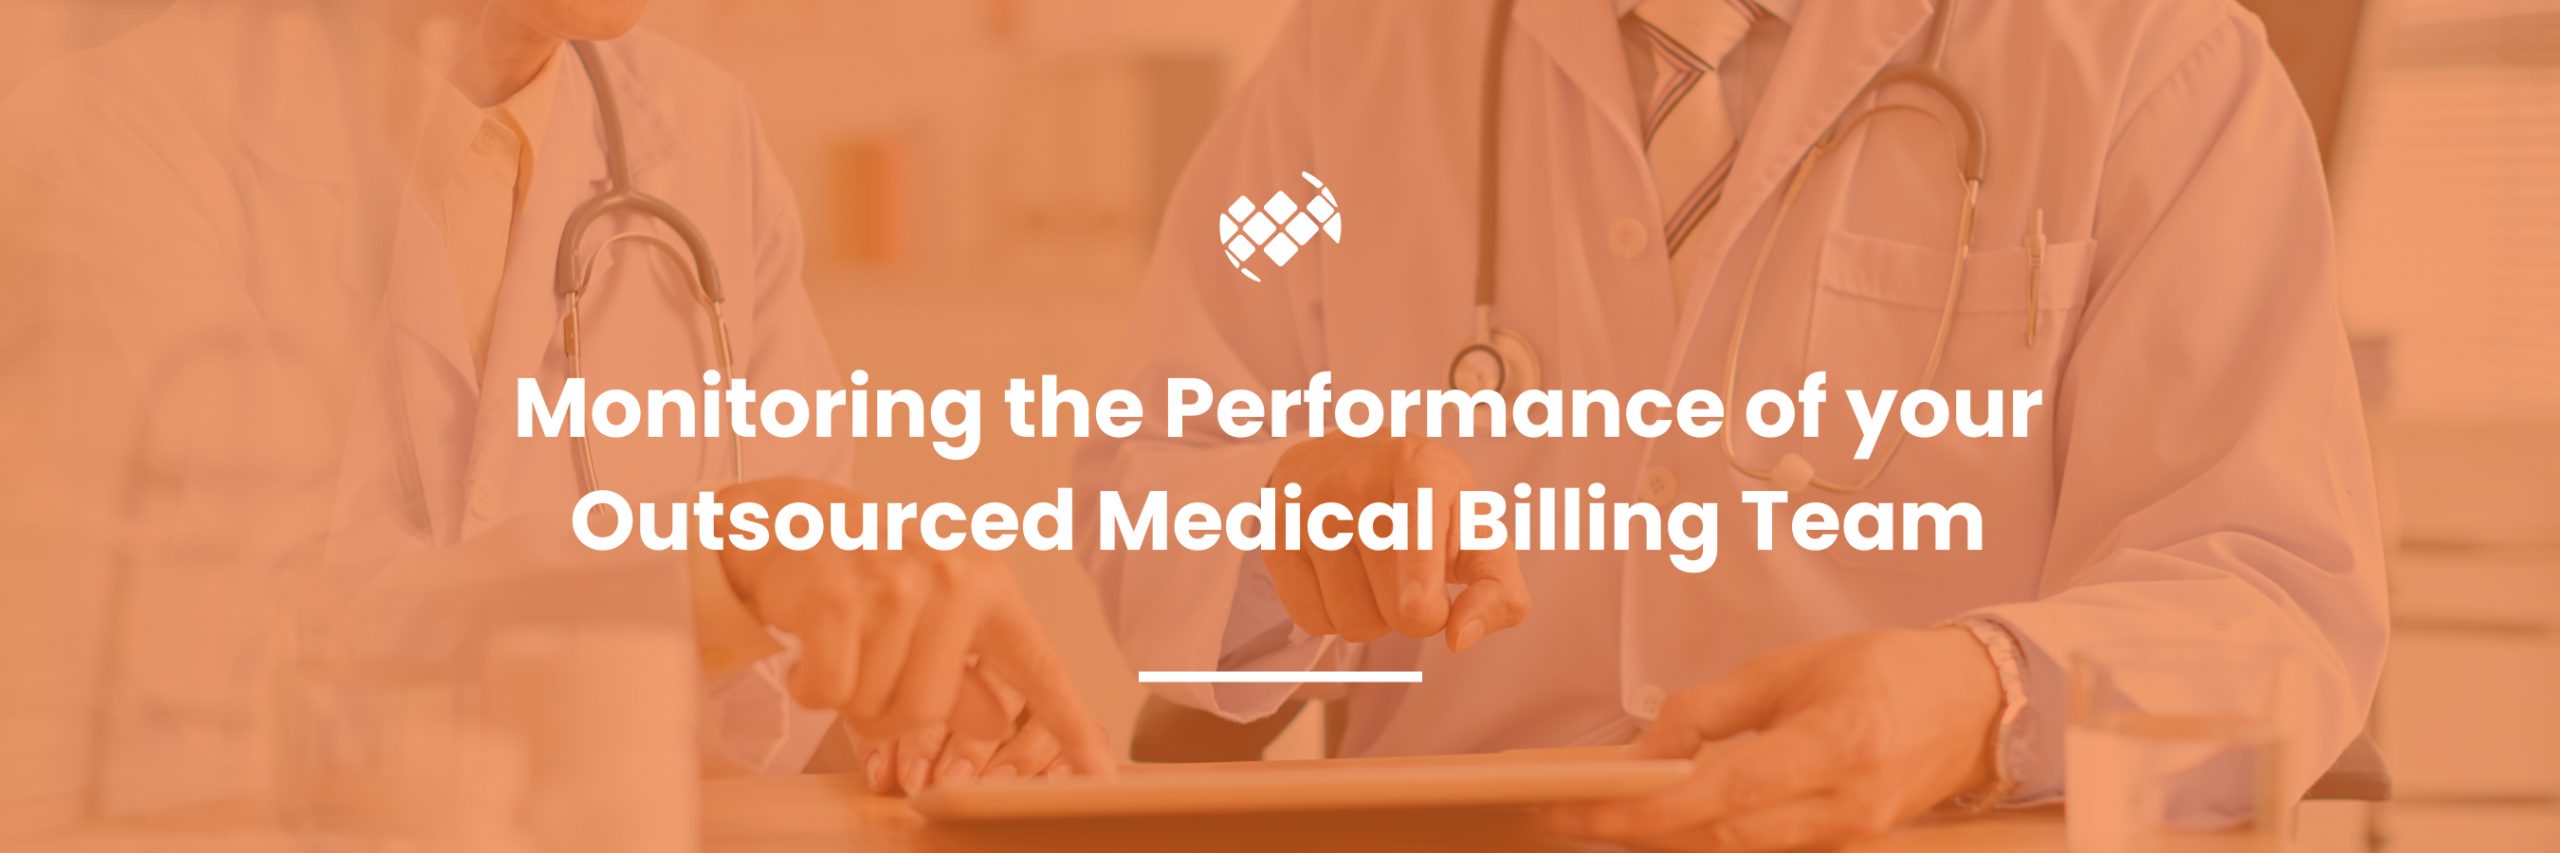 outsourced medical billing team